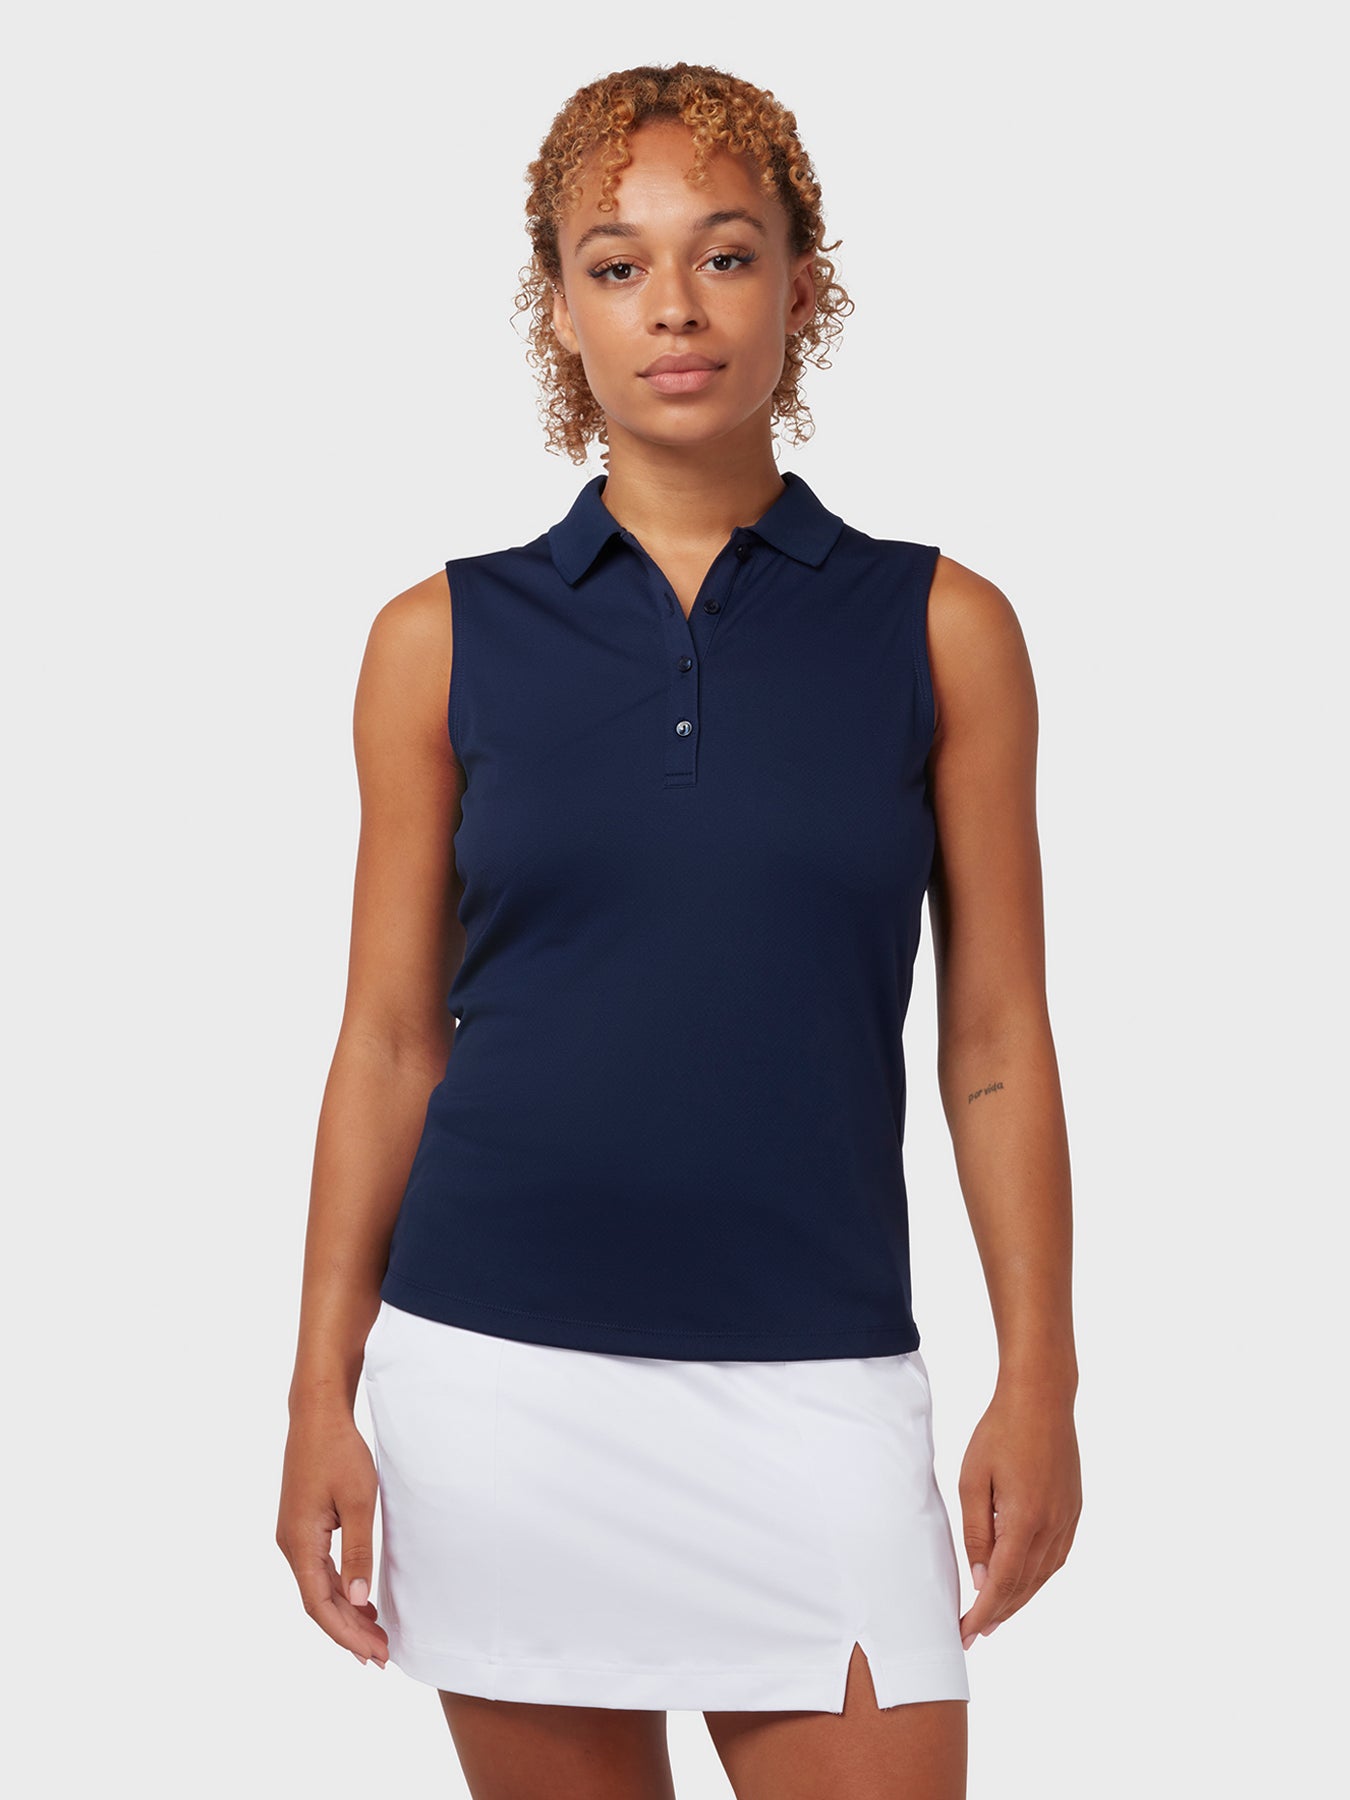 View Sleeveless Womens Polo In Peacoat Peacoat M information